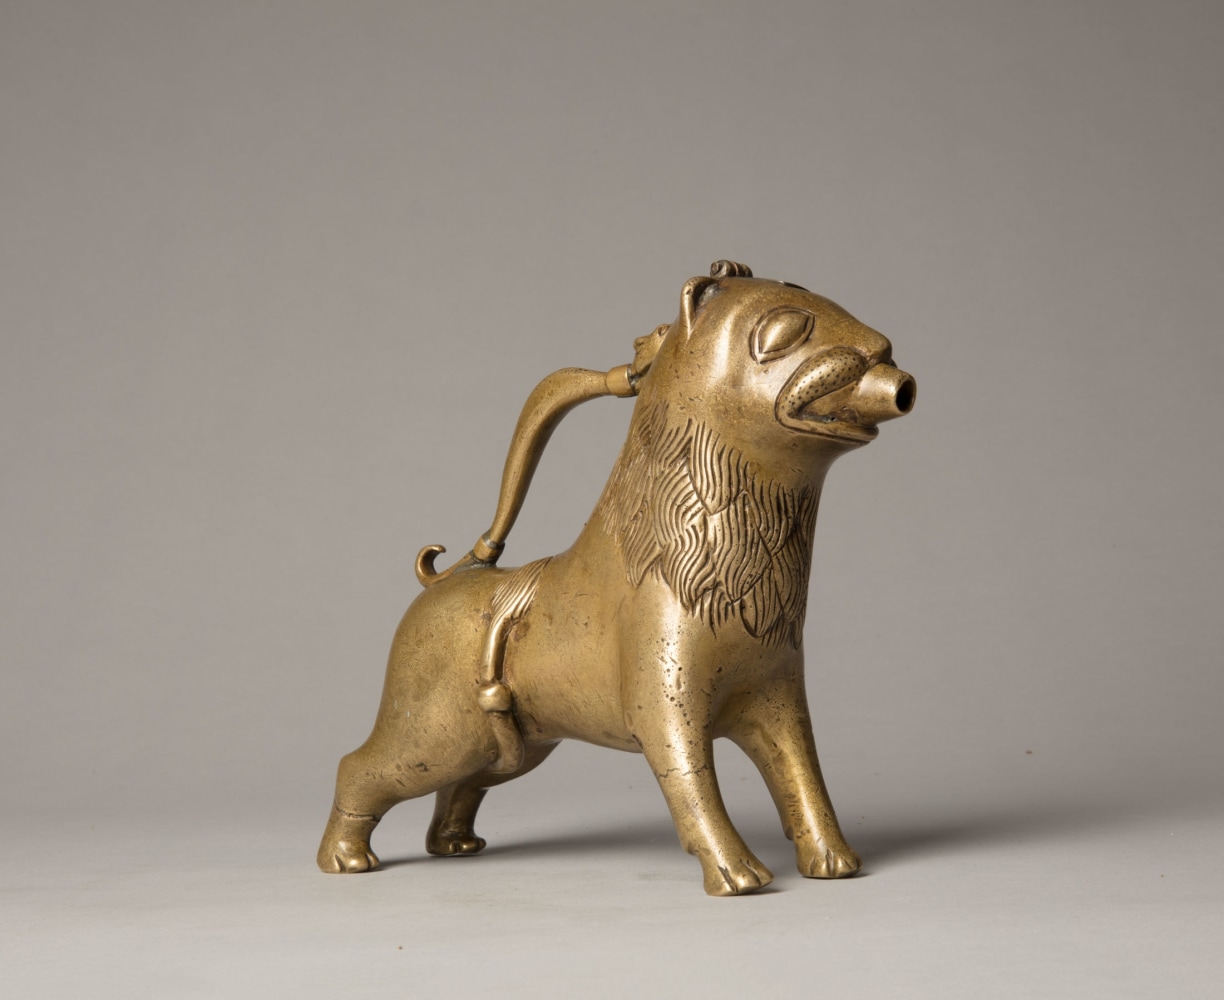 An aquamanile in the form of a lion, Early 13th century
Germany, probably Lower Saxony
cast copper alloy with fine soldered repairs to the handle at its upper and lower connecting points. Hairline fractures to the legs in two places. The hinged lid a modern replacement.
6 3/4 x 9 1/8 x 2 1/8 inches
(17.1 x 22.9 x 5.5 cm)